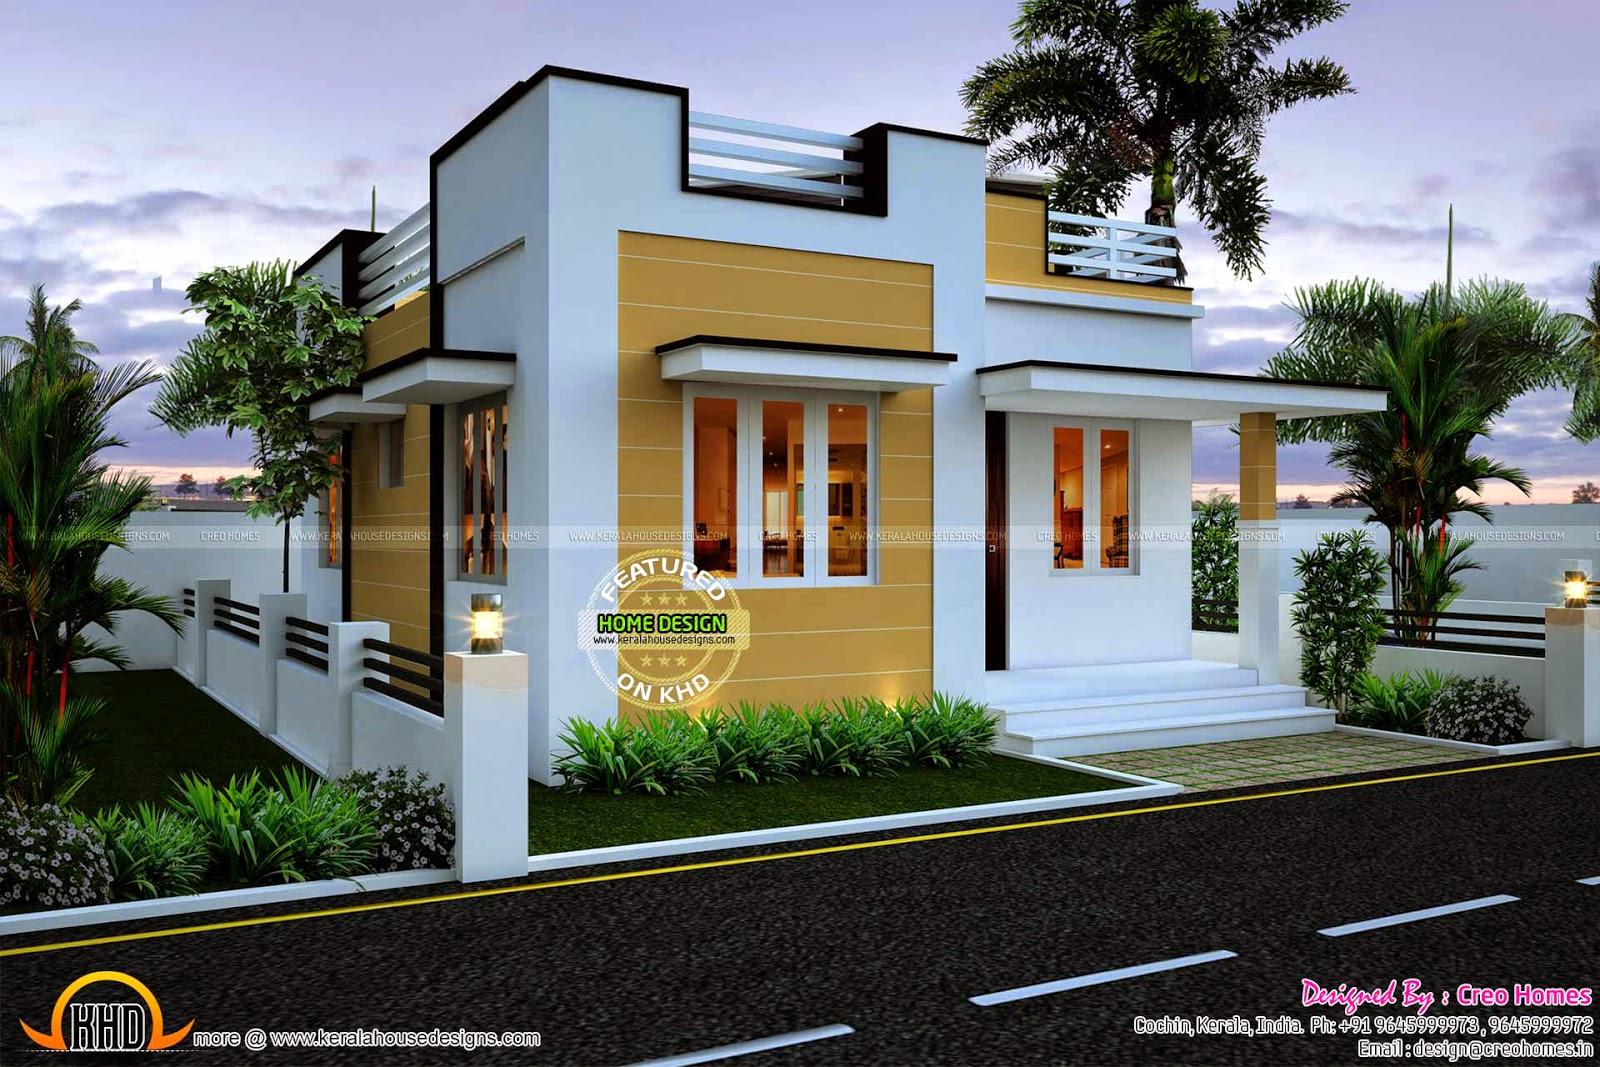 545 Sq Ft Beautiful Kerala Home Plan with Budget of 5 to 7 